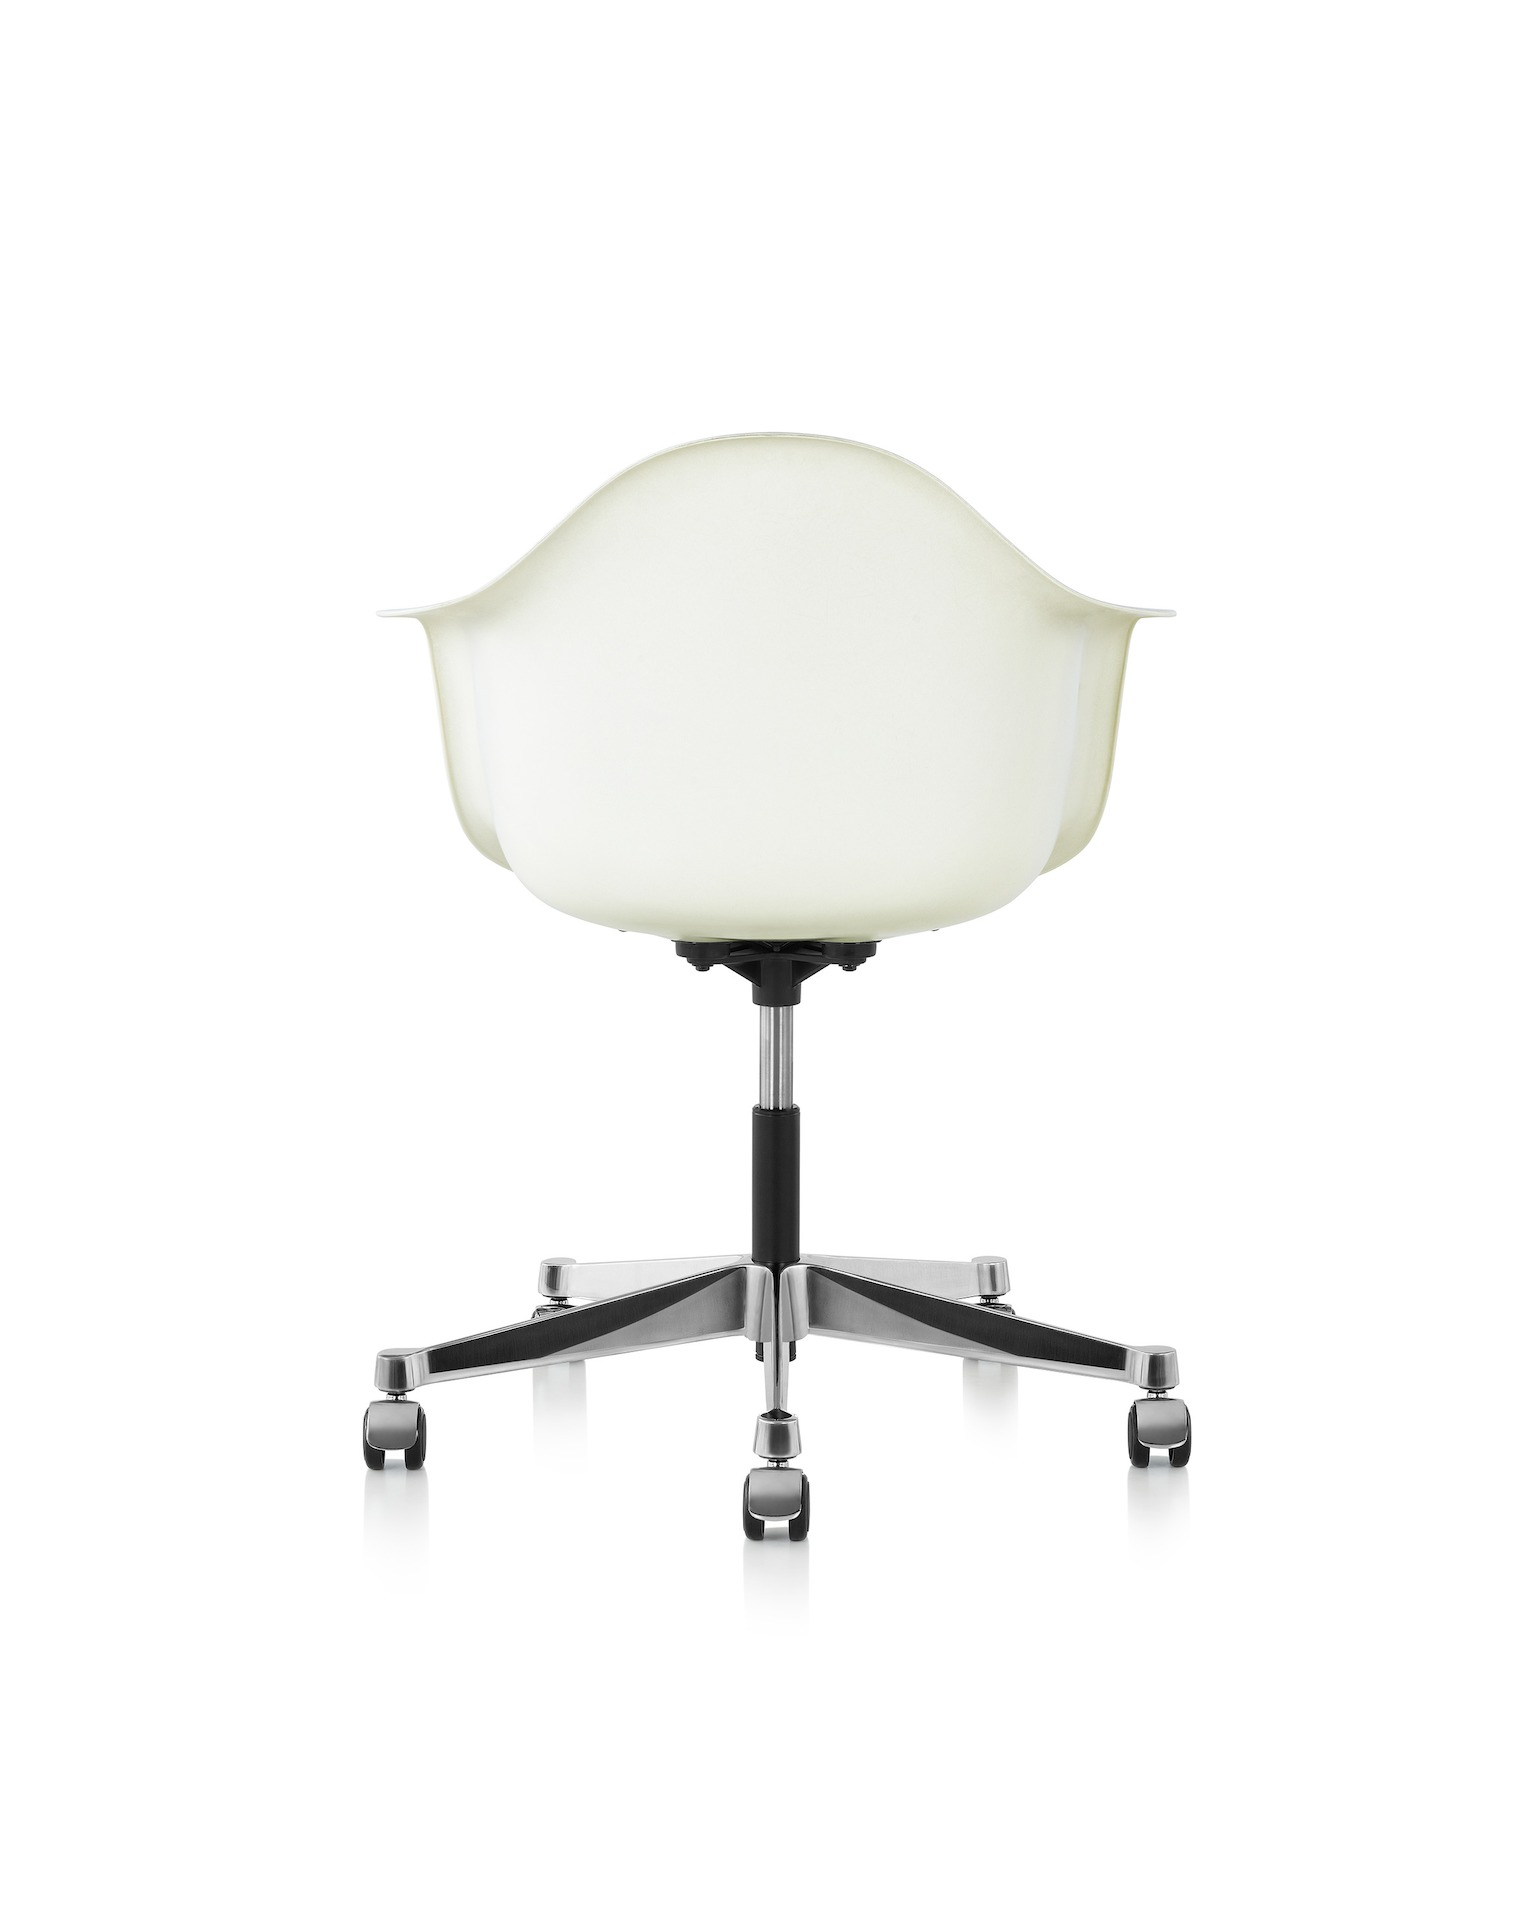 An Eames Task Chair with a parchment colored shell and a five star caster base. Viewed from behind.